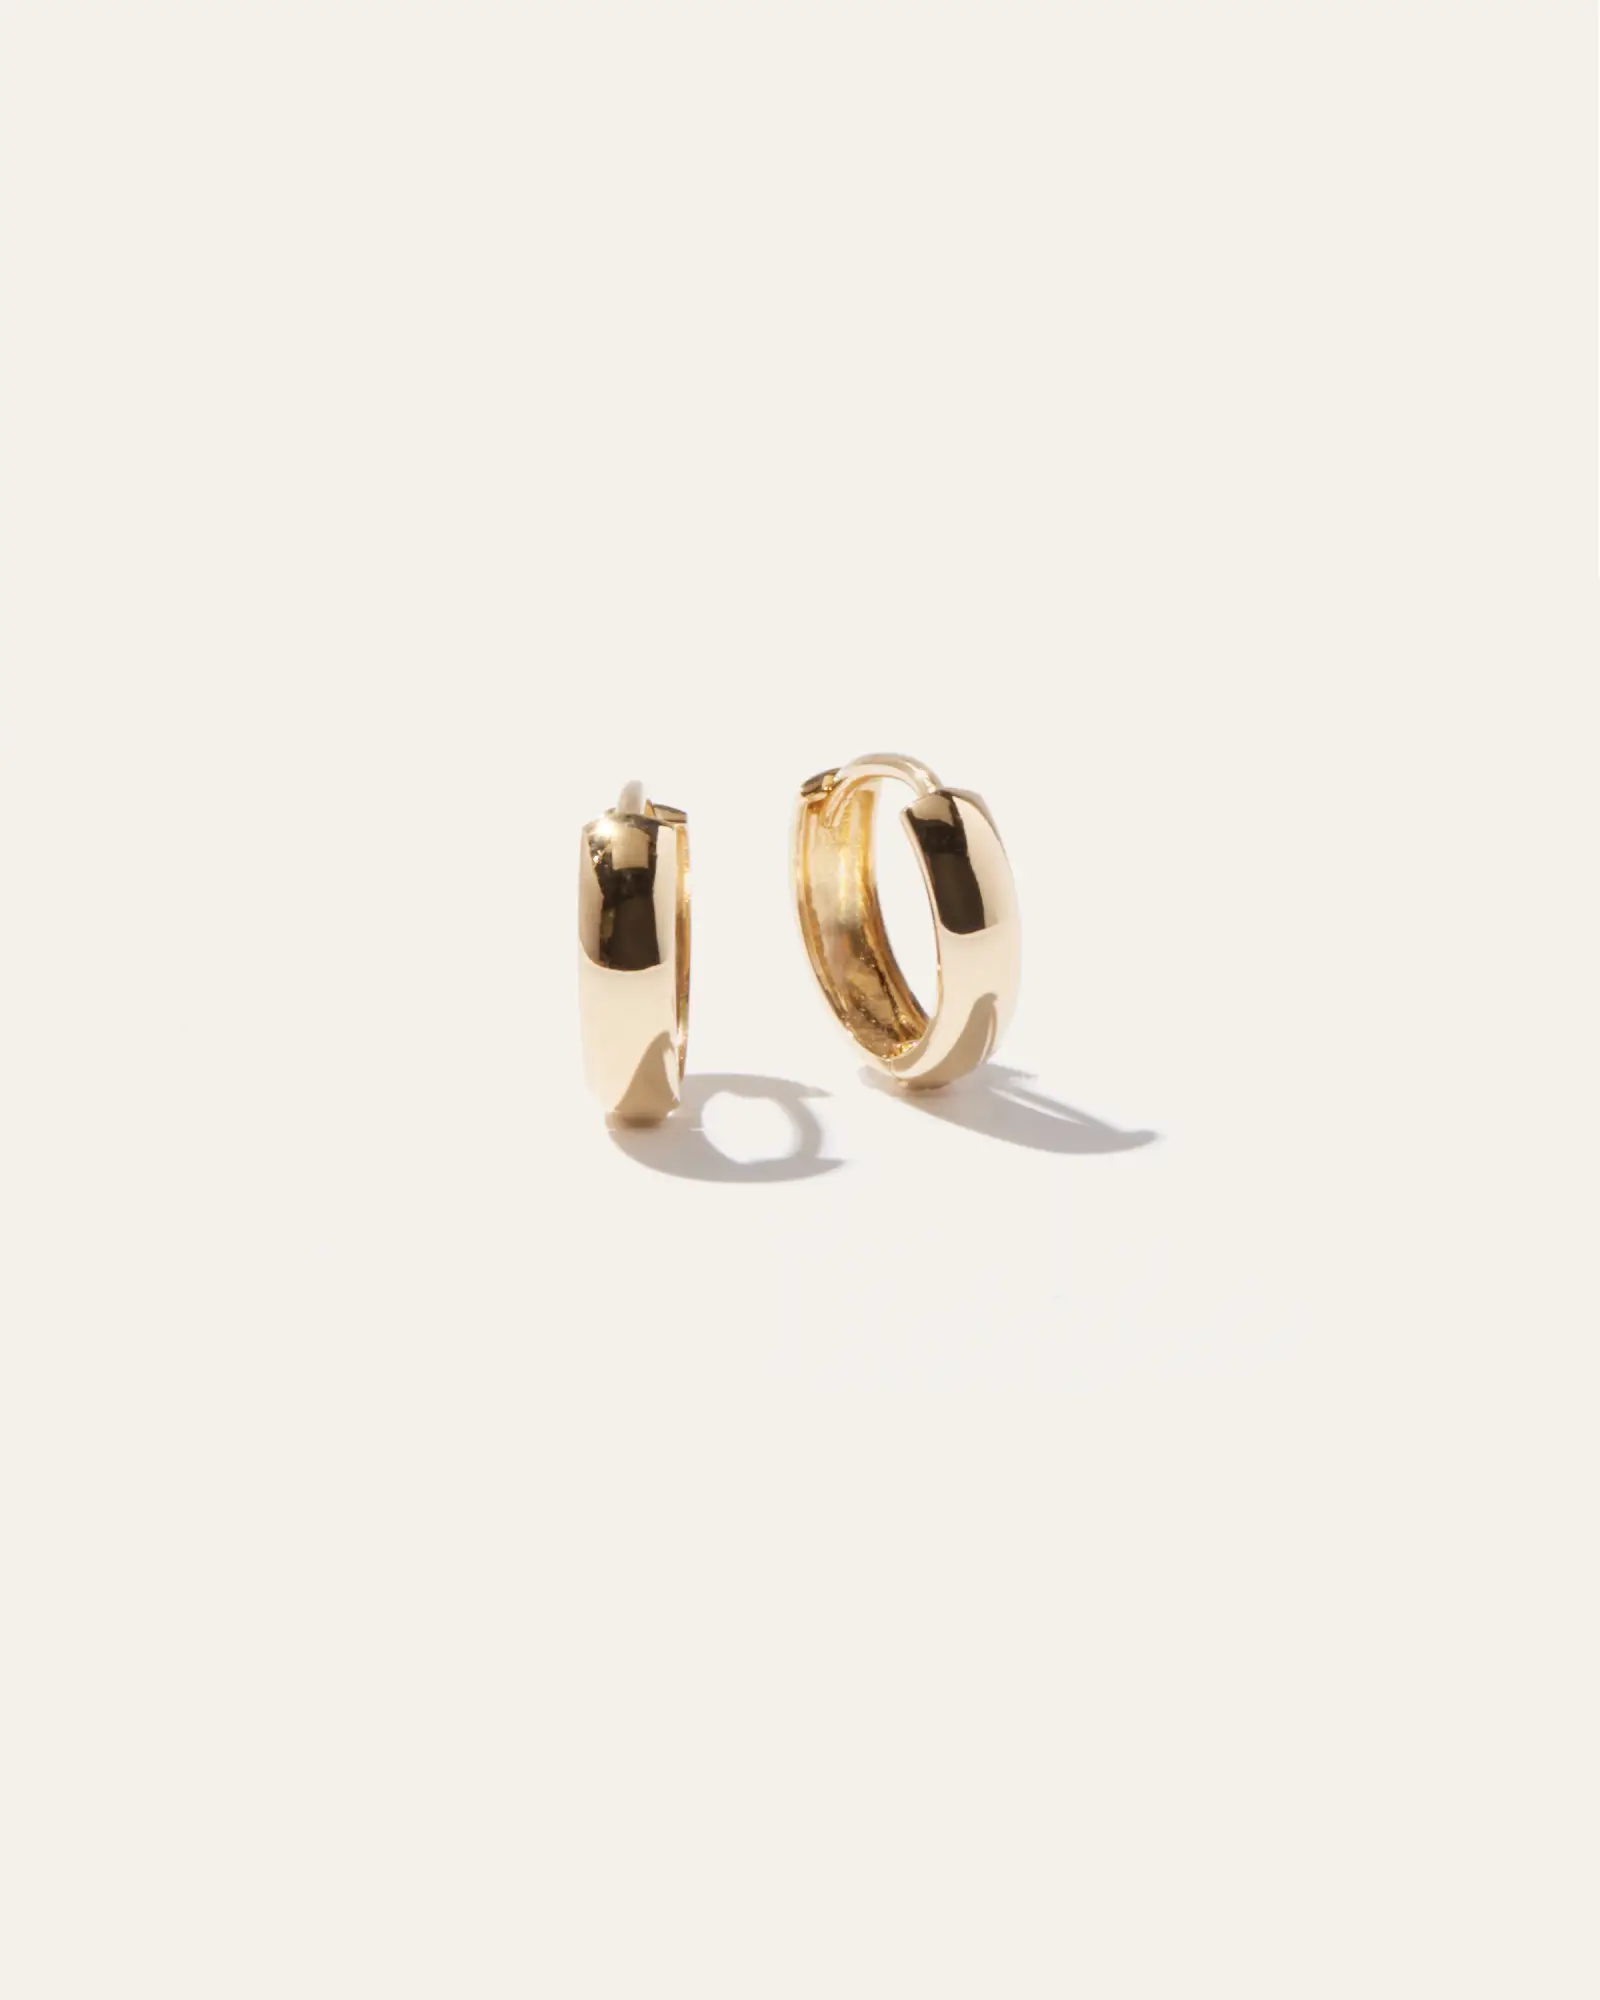 1. Quince Bold 14k Gold Hoops